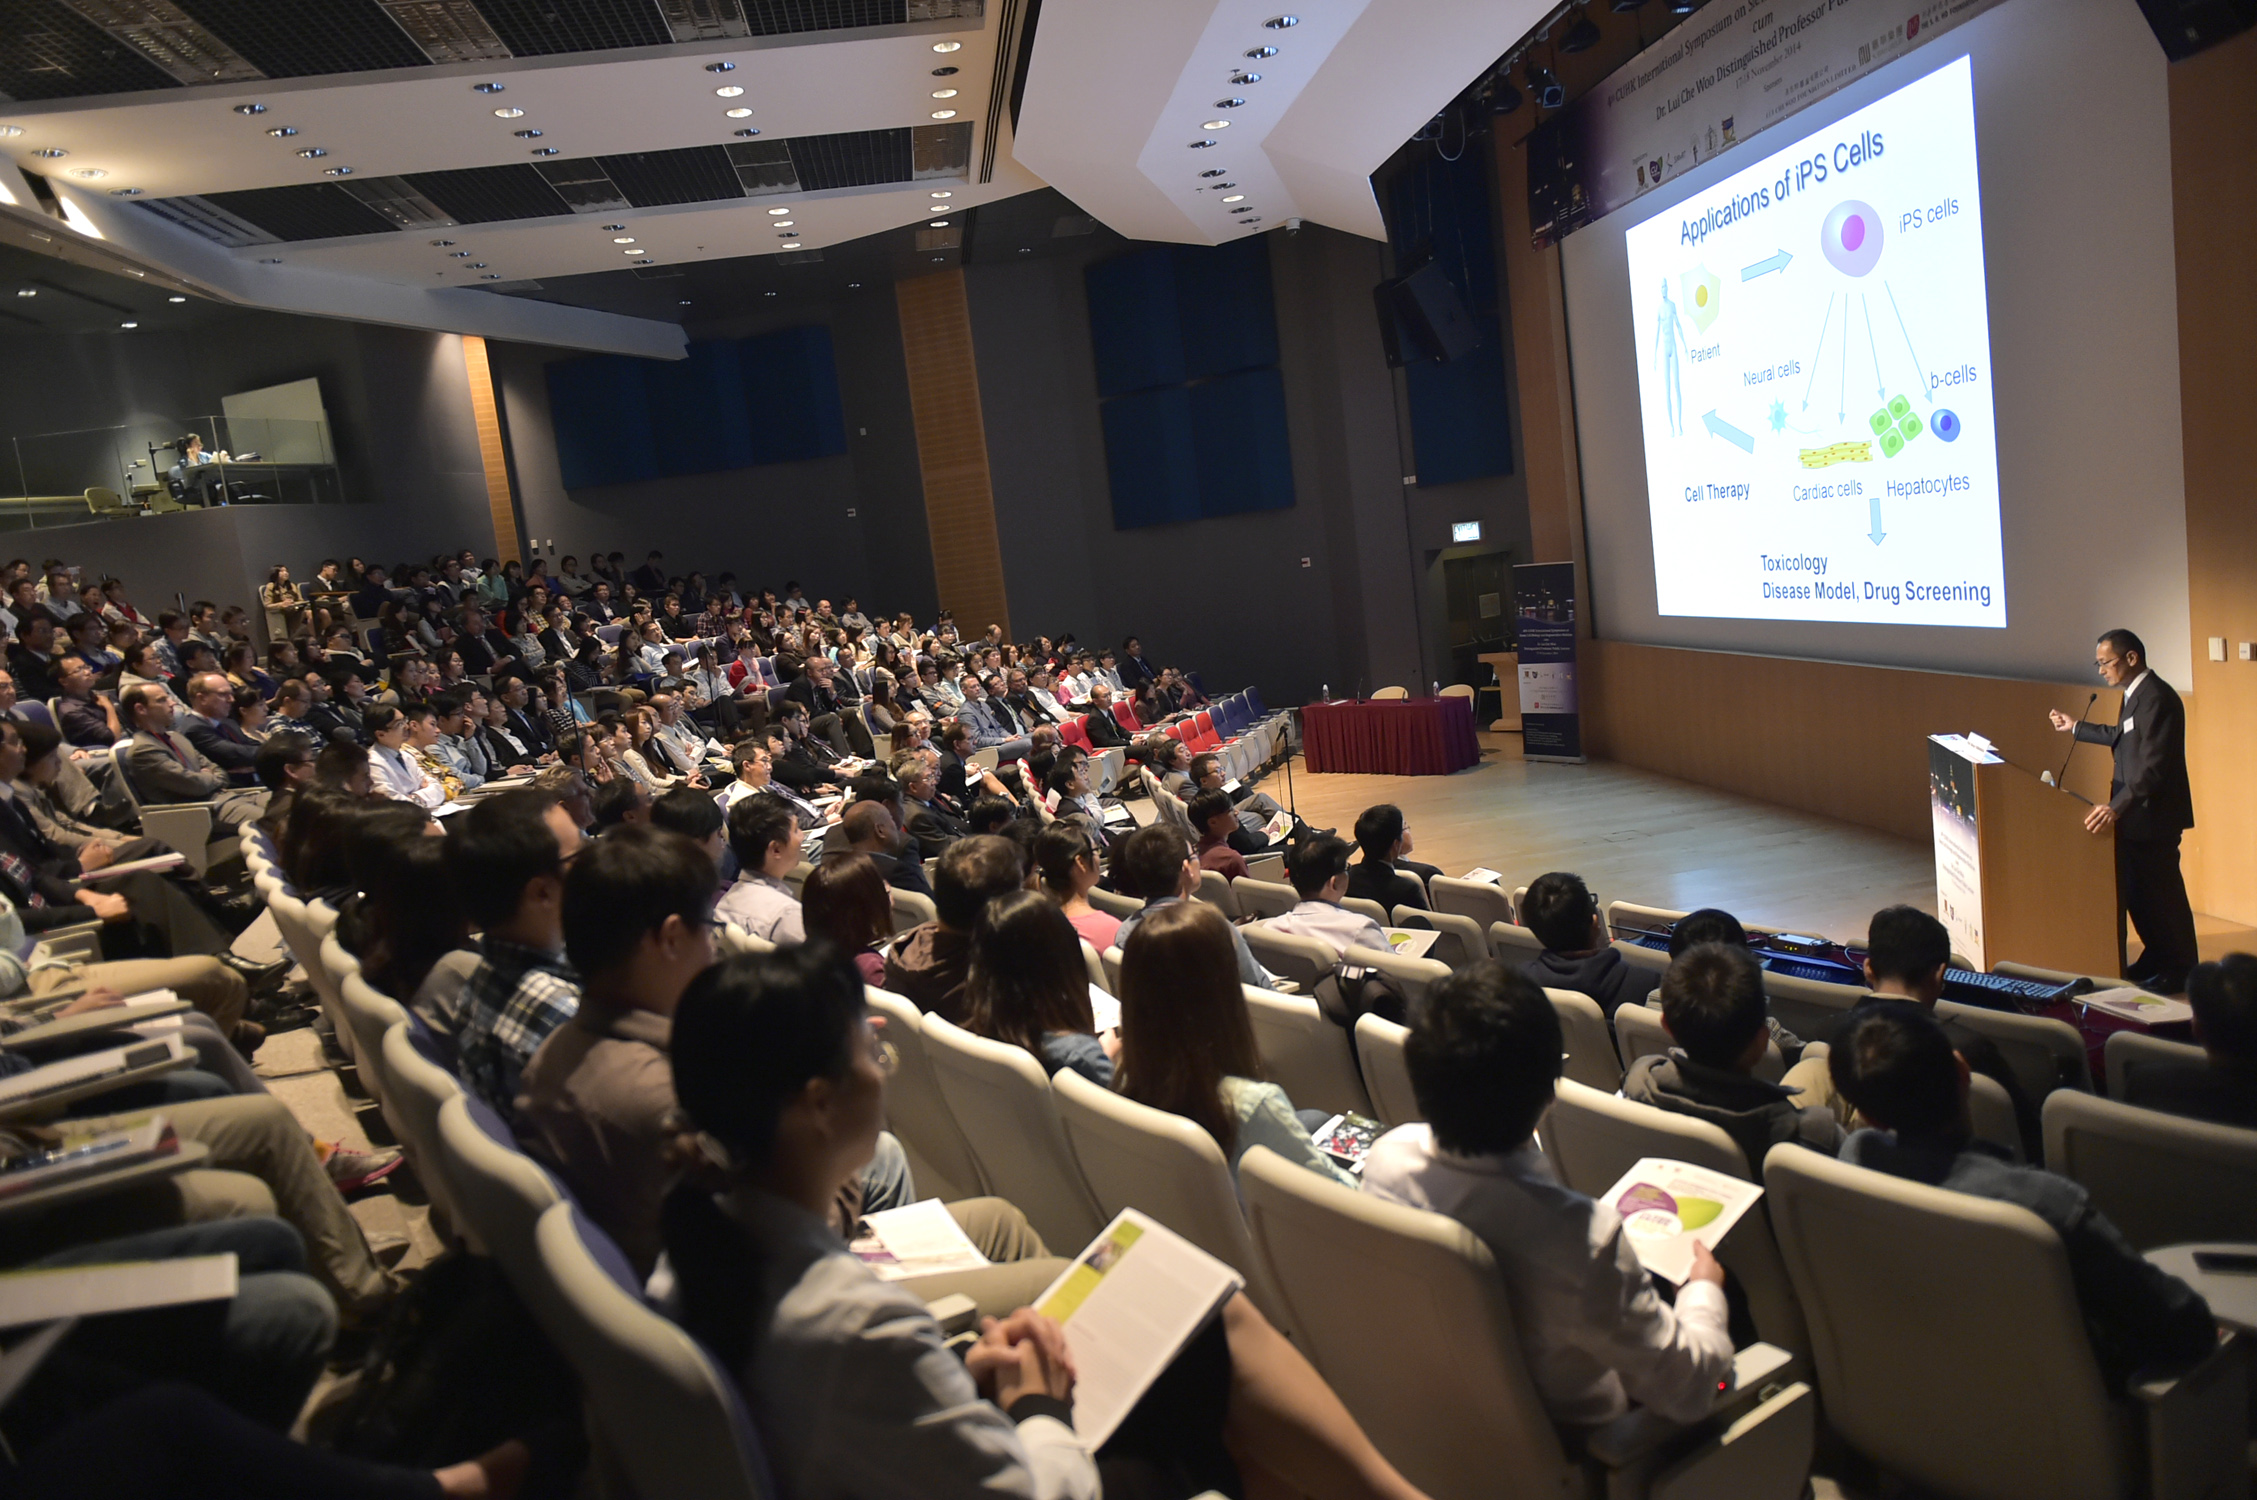 The 'Dr Lui Che Woo Distinguished Professor Public Lecture' draws over 300 guests in attendance.